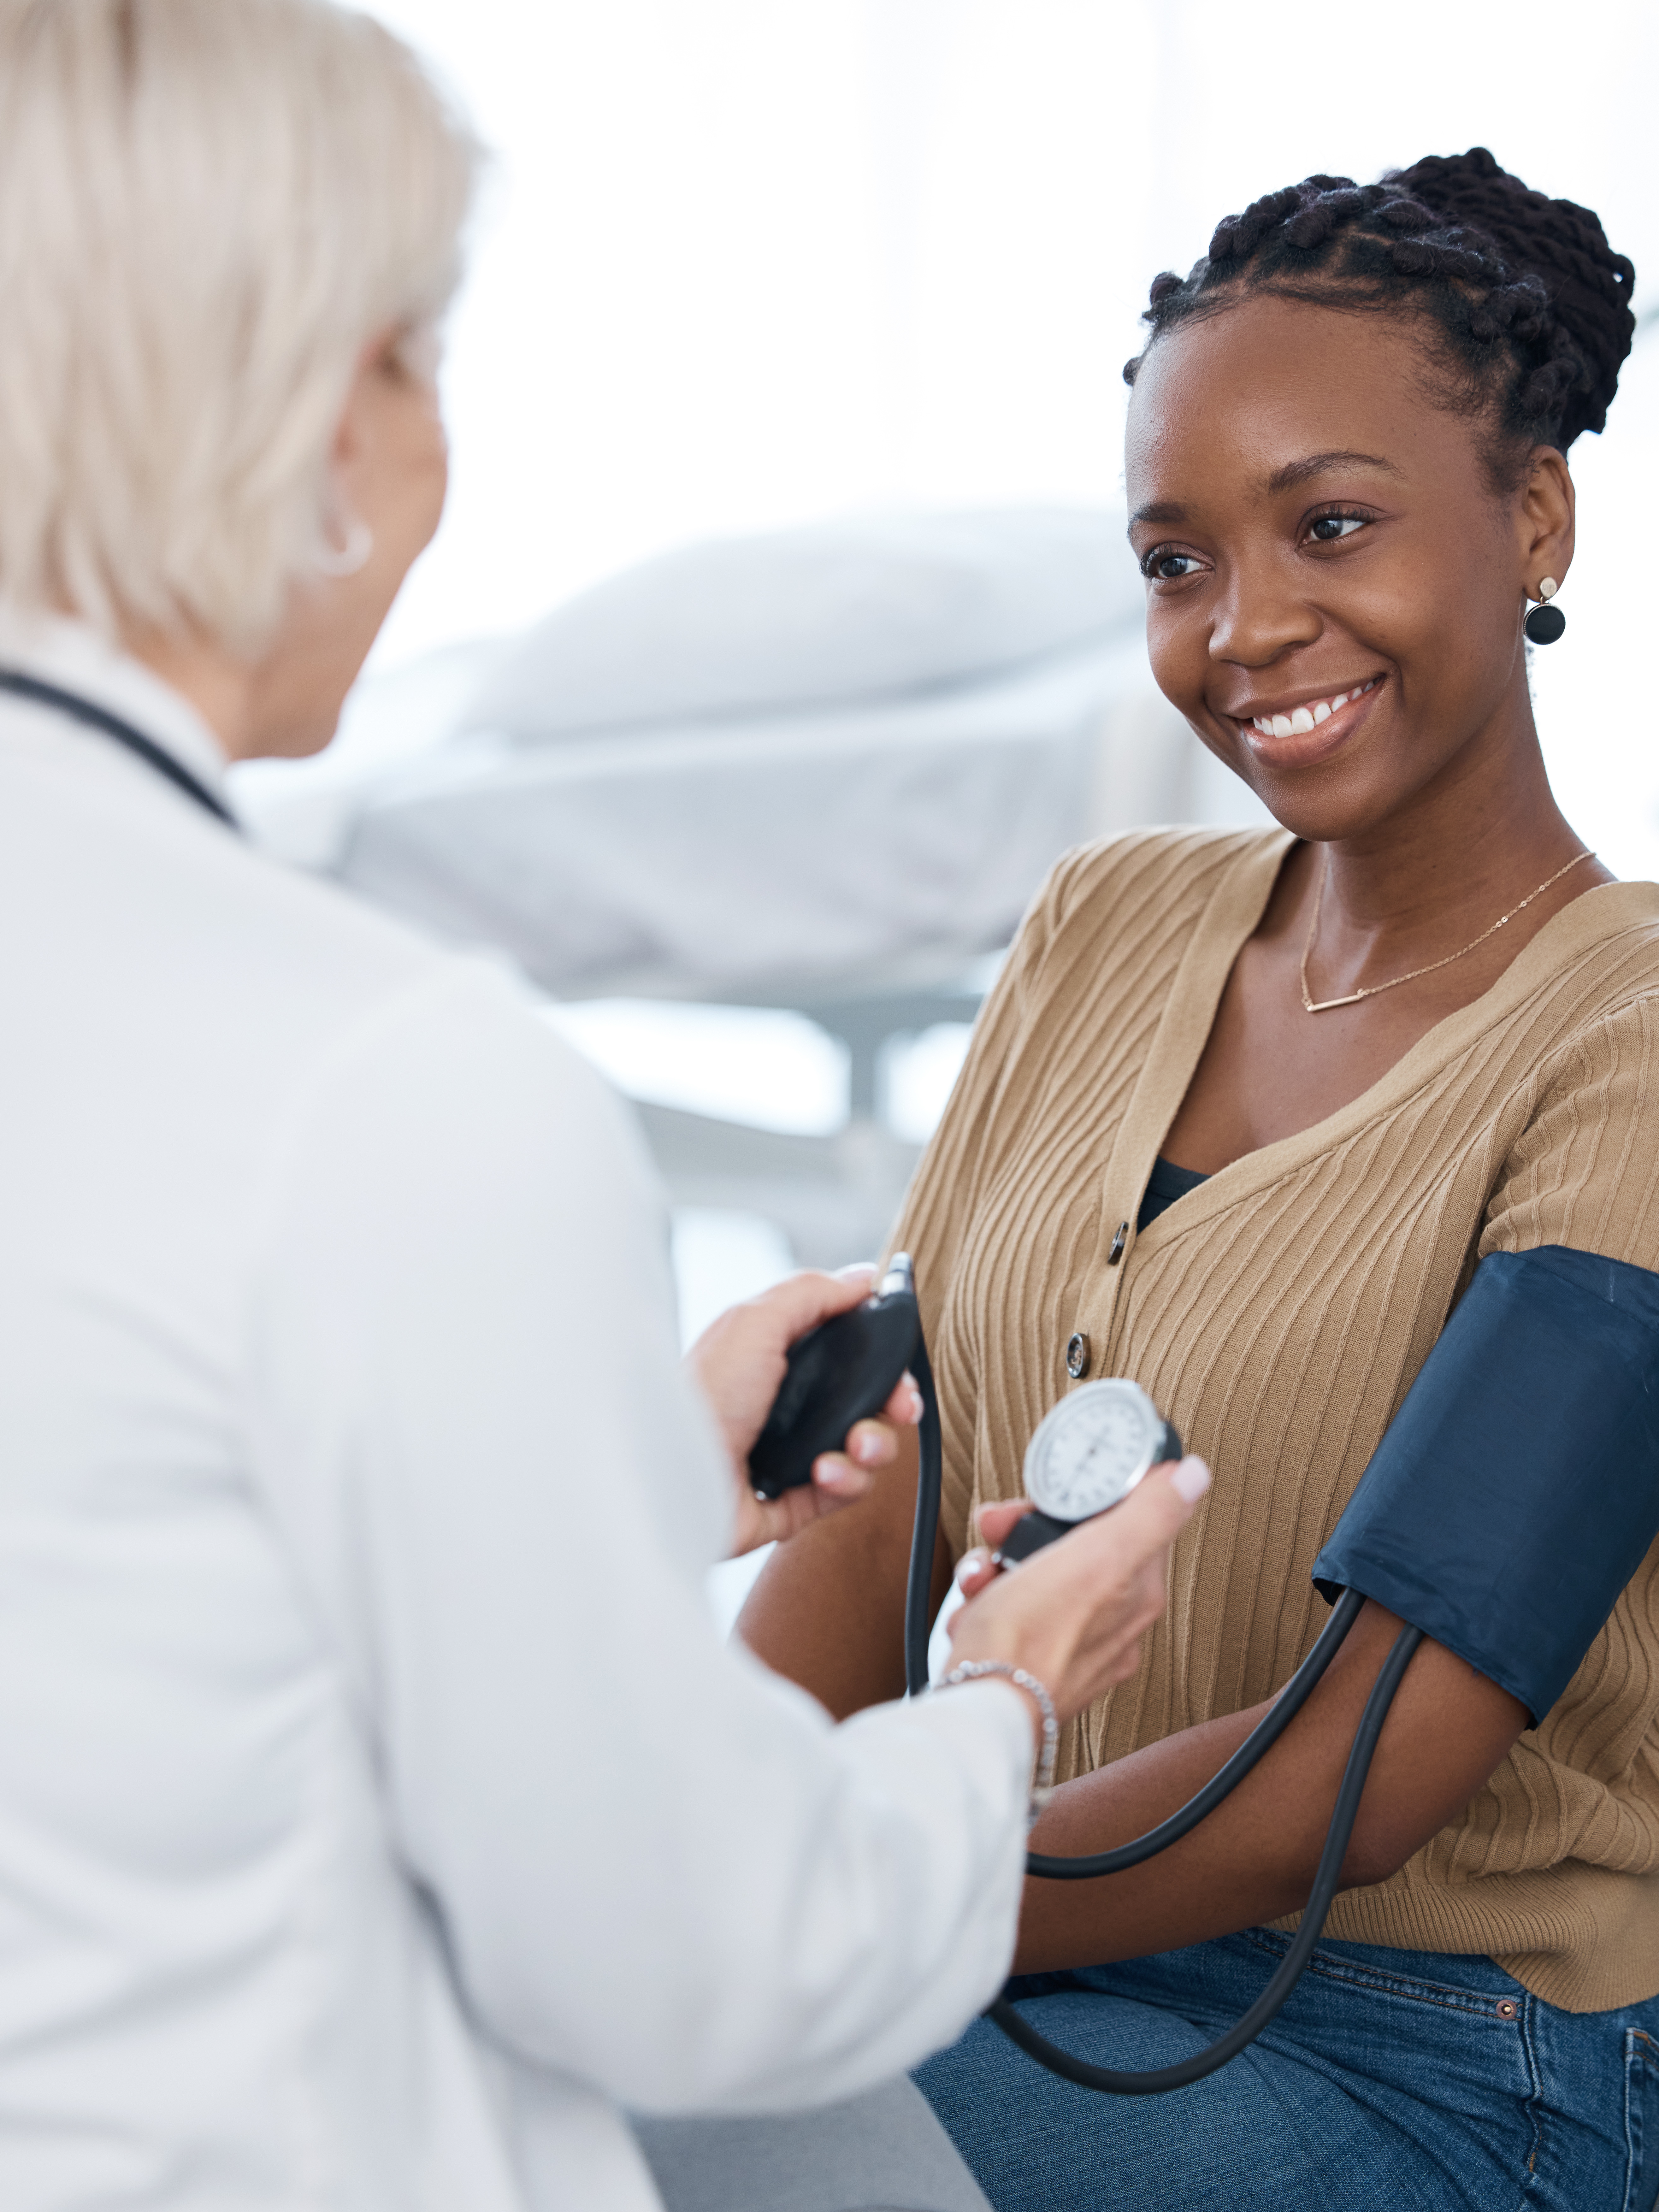 Blood pressure, doctor and black woman patient smile in hospital for healthcare consulting services